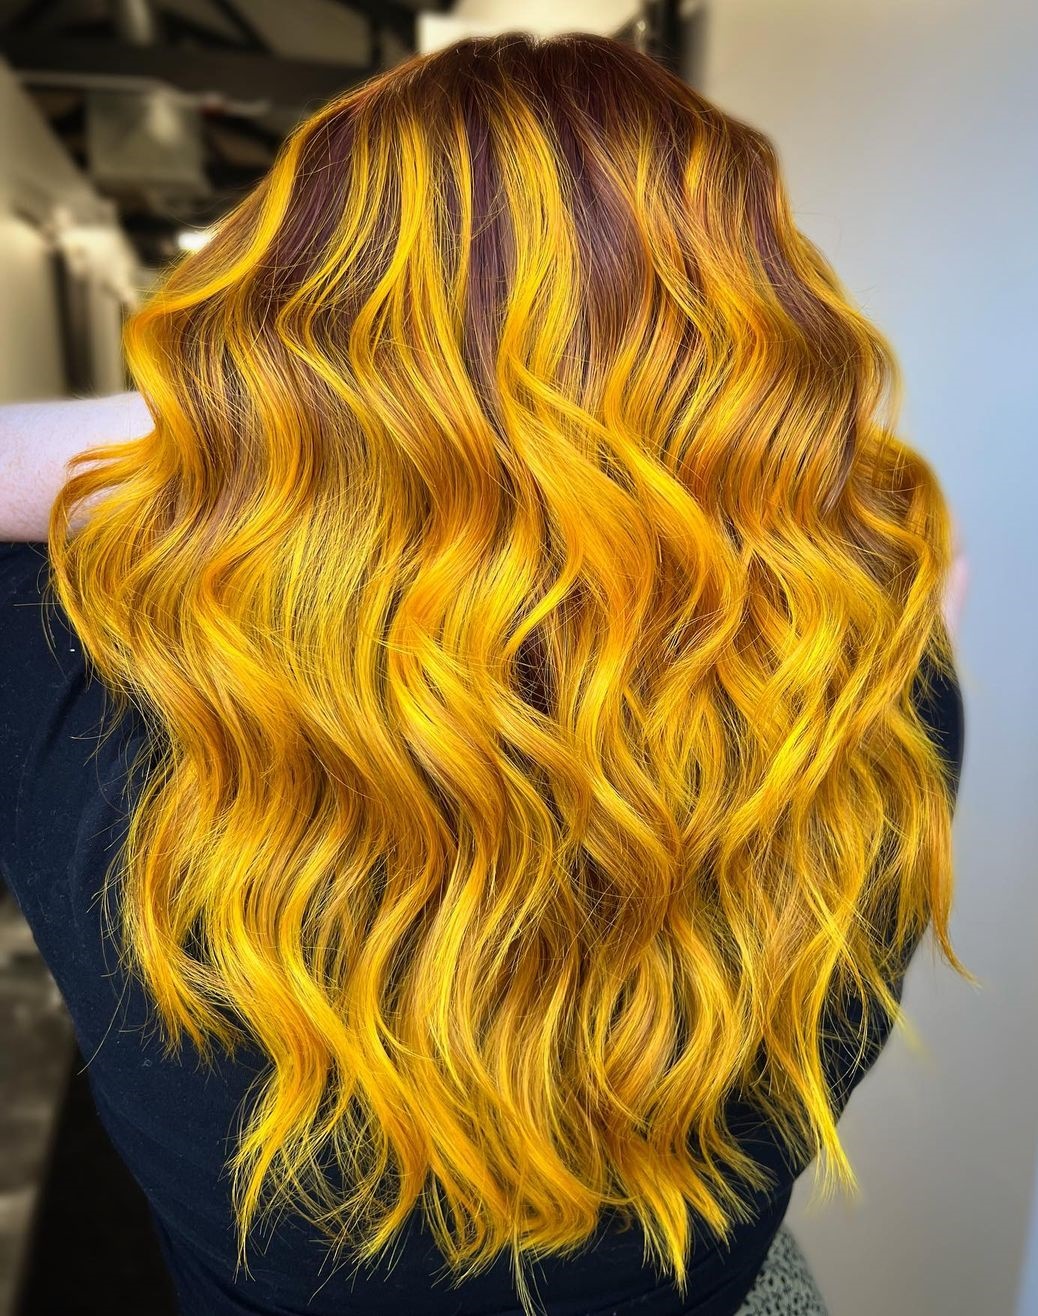 Mustard Yellow Color on Wavy Hair